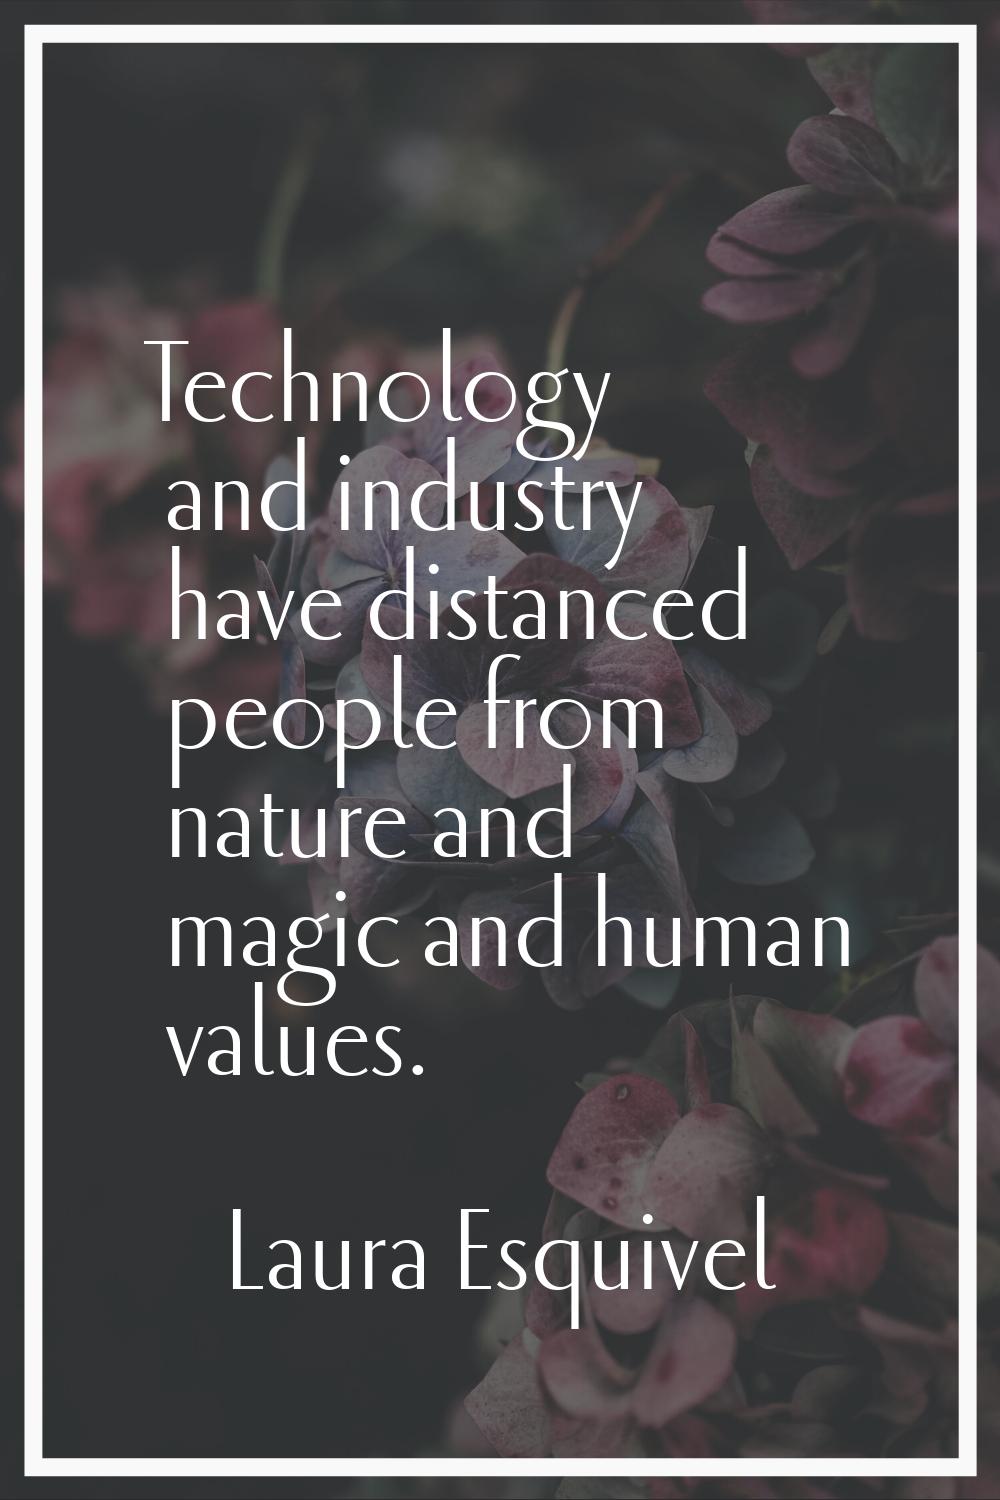 Technology and industry have distanced people from nature and magic and human values.